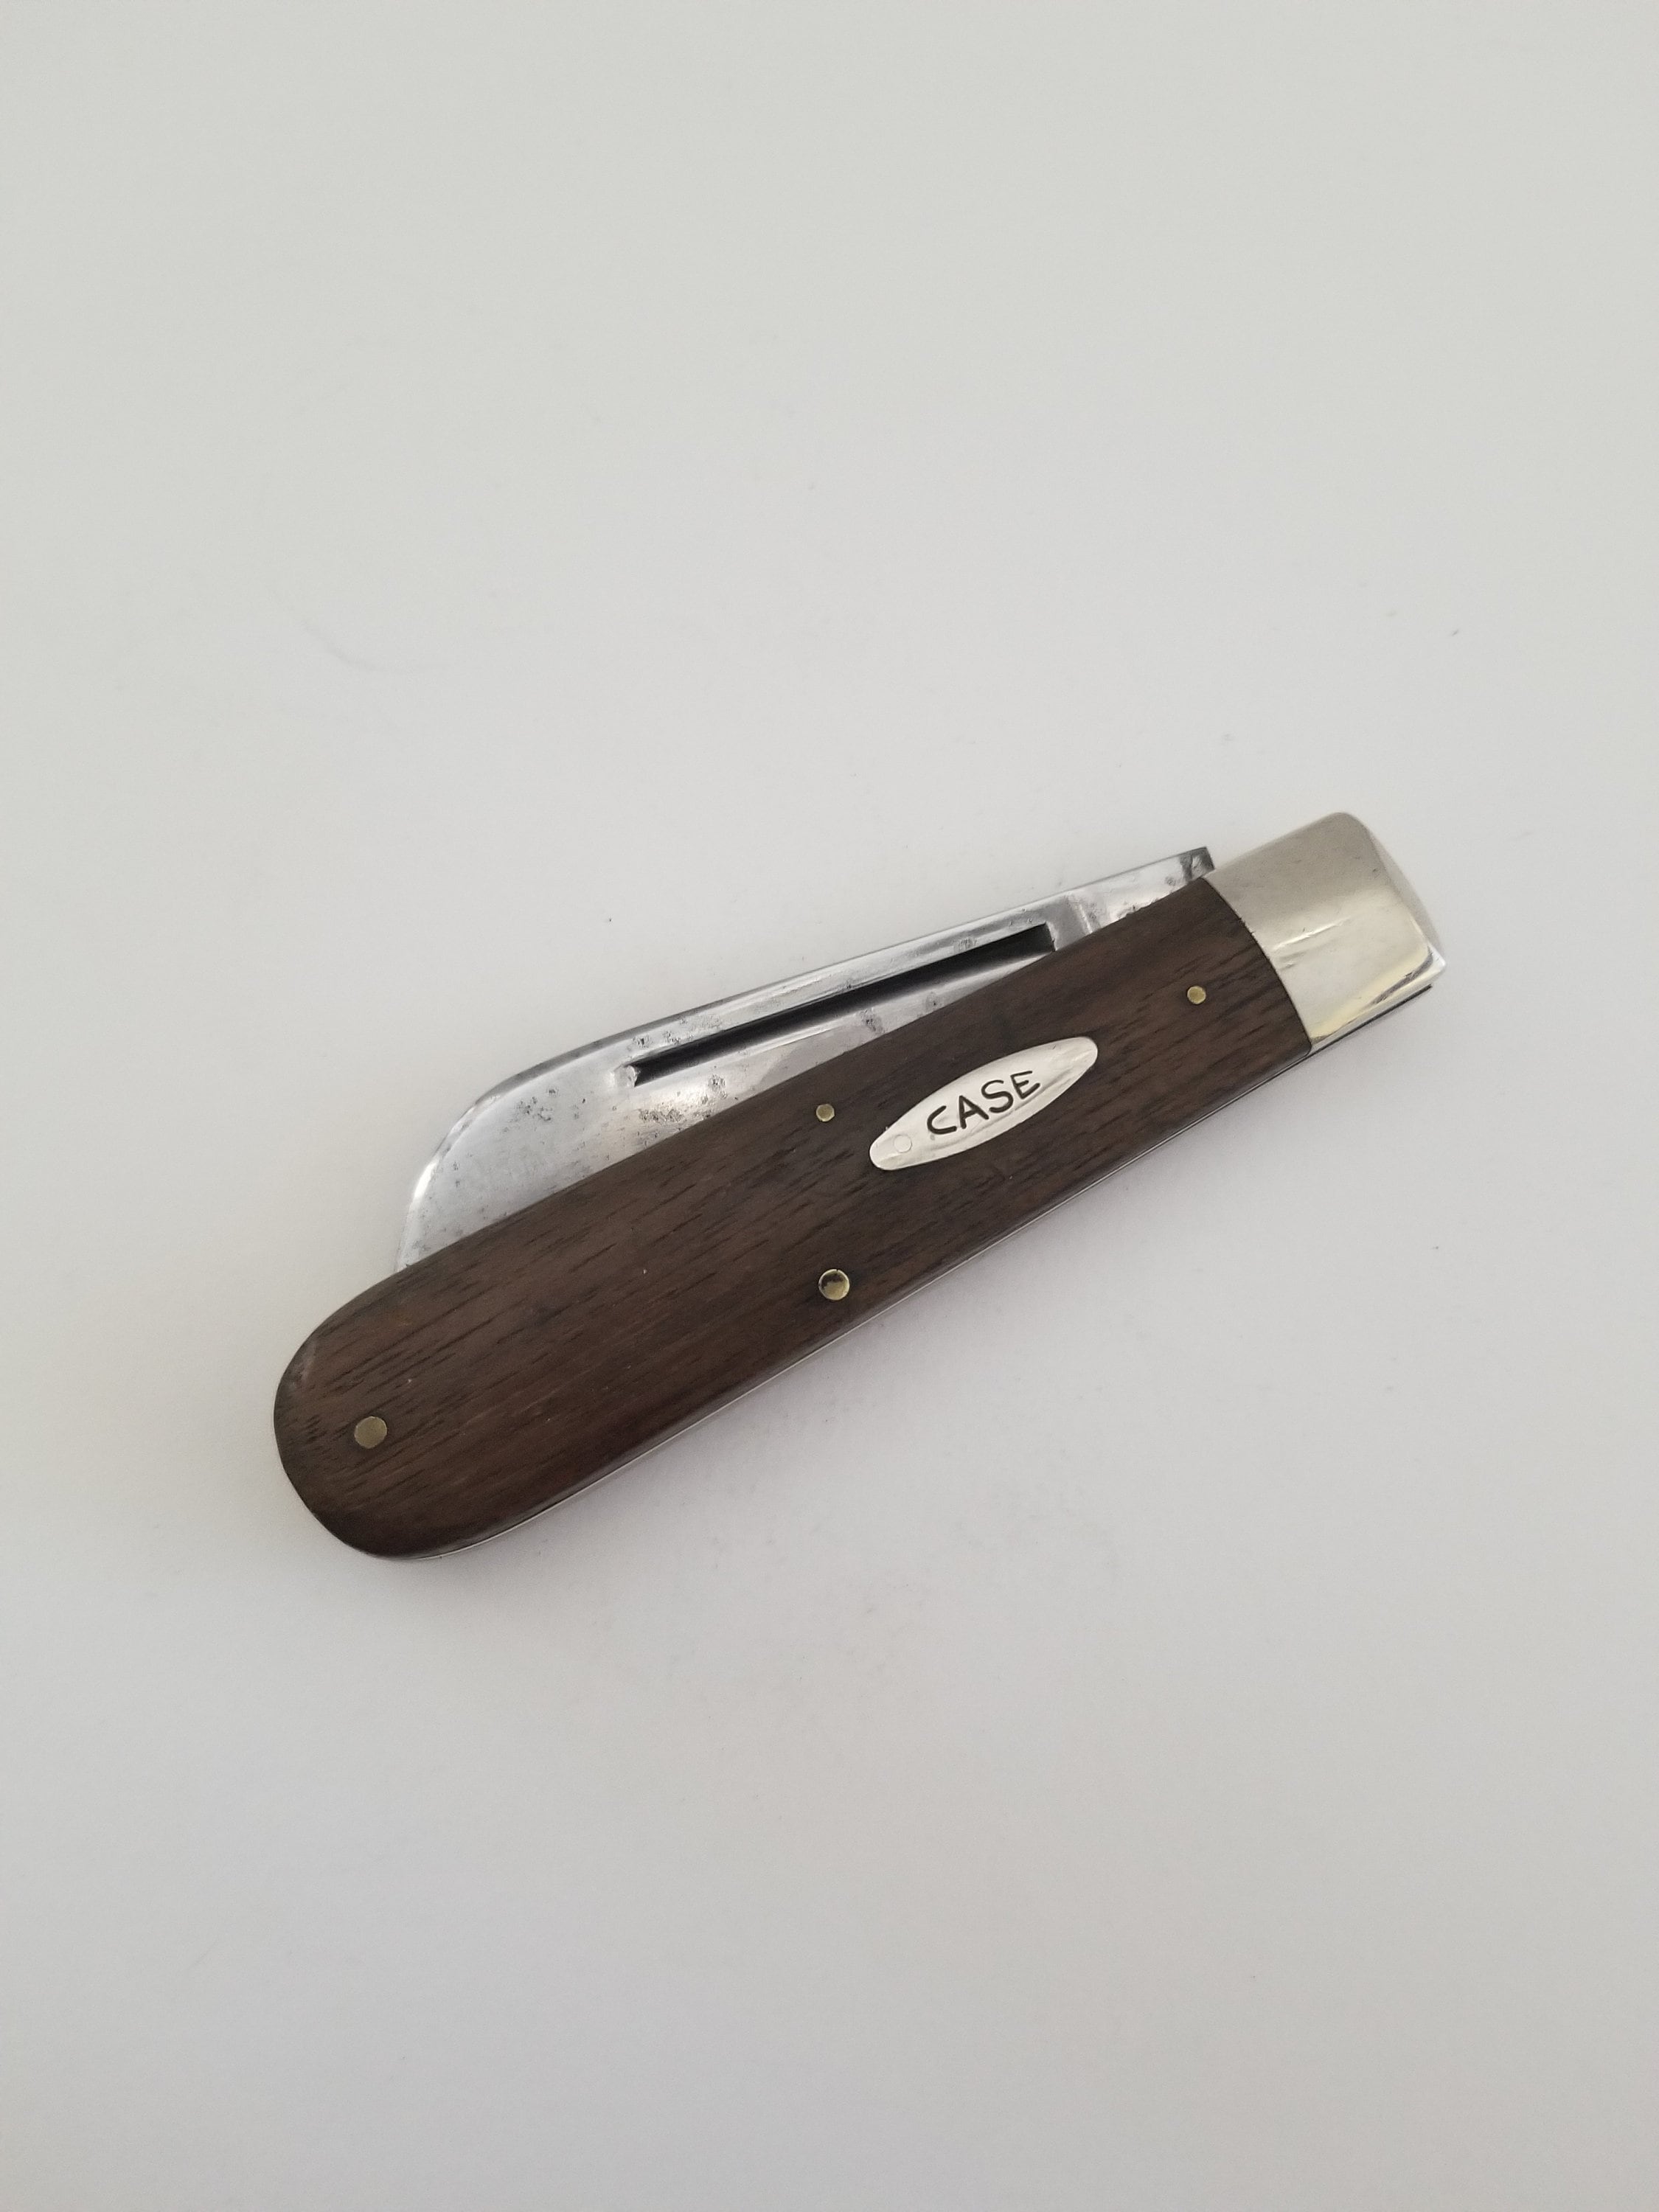 Old Hickory 705 Knife Set Review